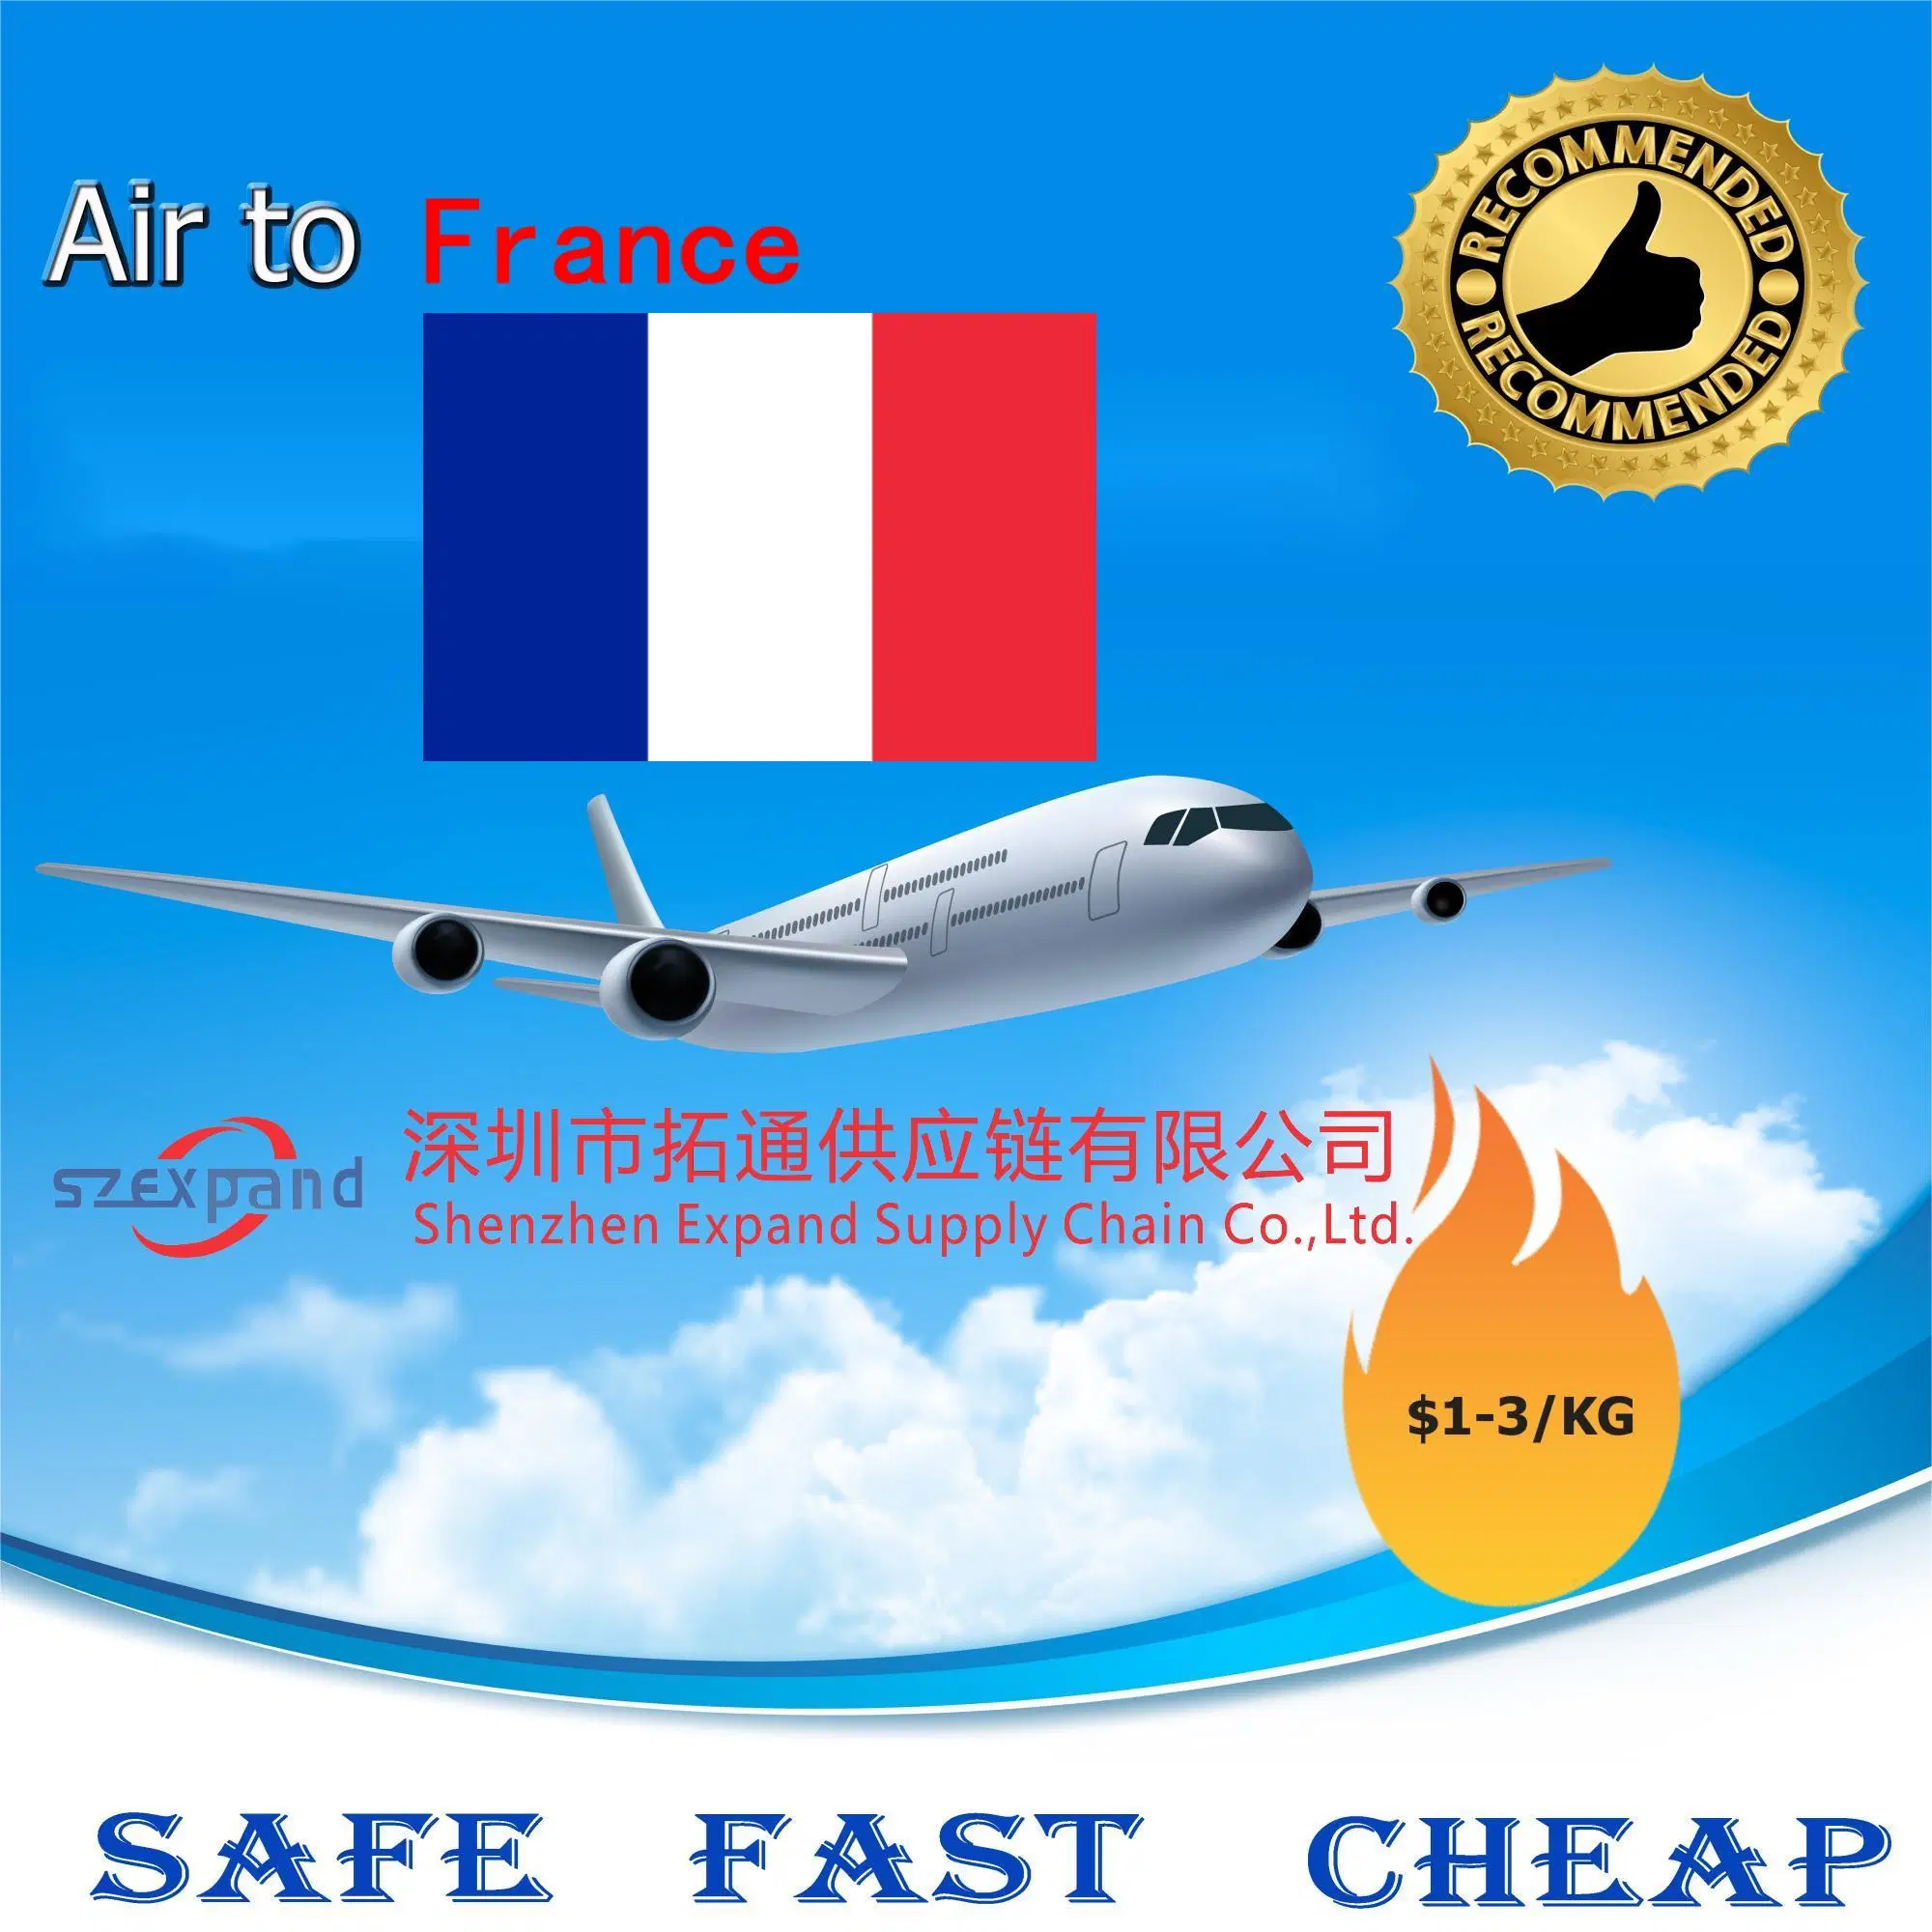 Alibaba Express, by Air/Sea/Railway/Truck Cargo/Freight/Shipping Container LCL Forwarder/Agent From China to Europe, Paris, France Amazon/Fba DDP/DDU Logistics